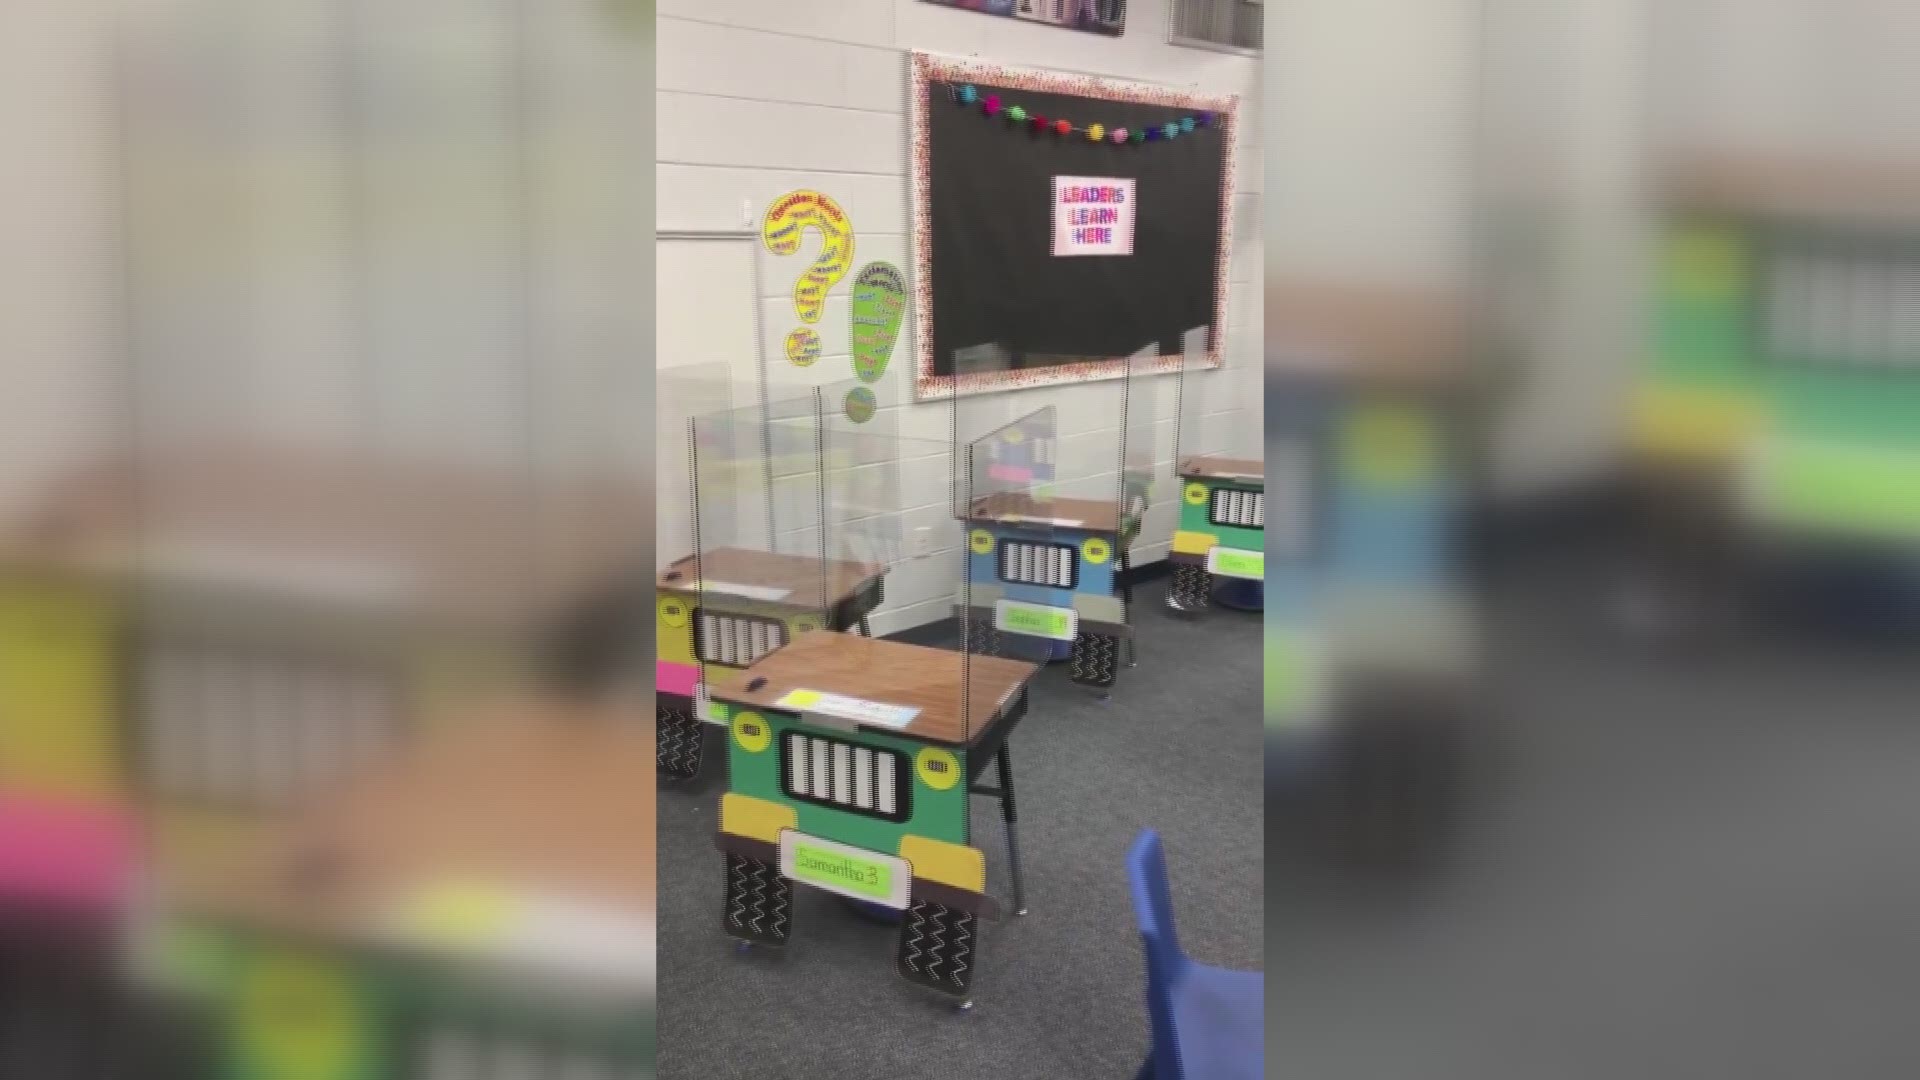 How do you get kids excited to learn while remaining safe amid a global pandemic? One Florida teacher may have a solution. Video courtesy of Kim Martin.